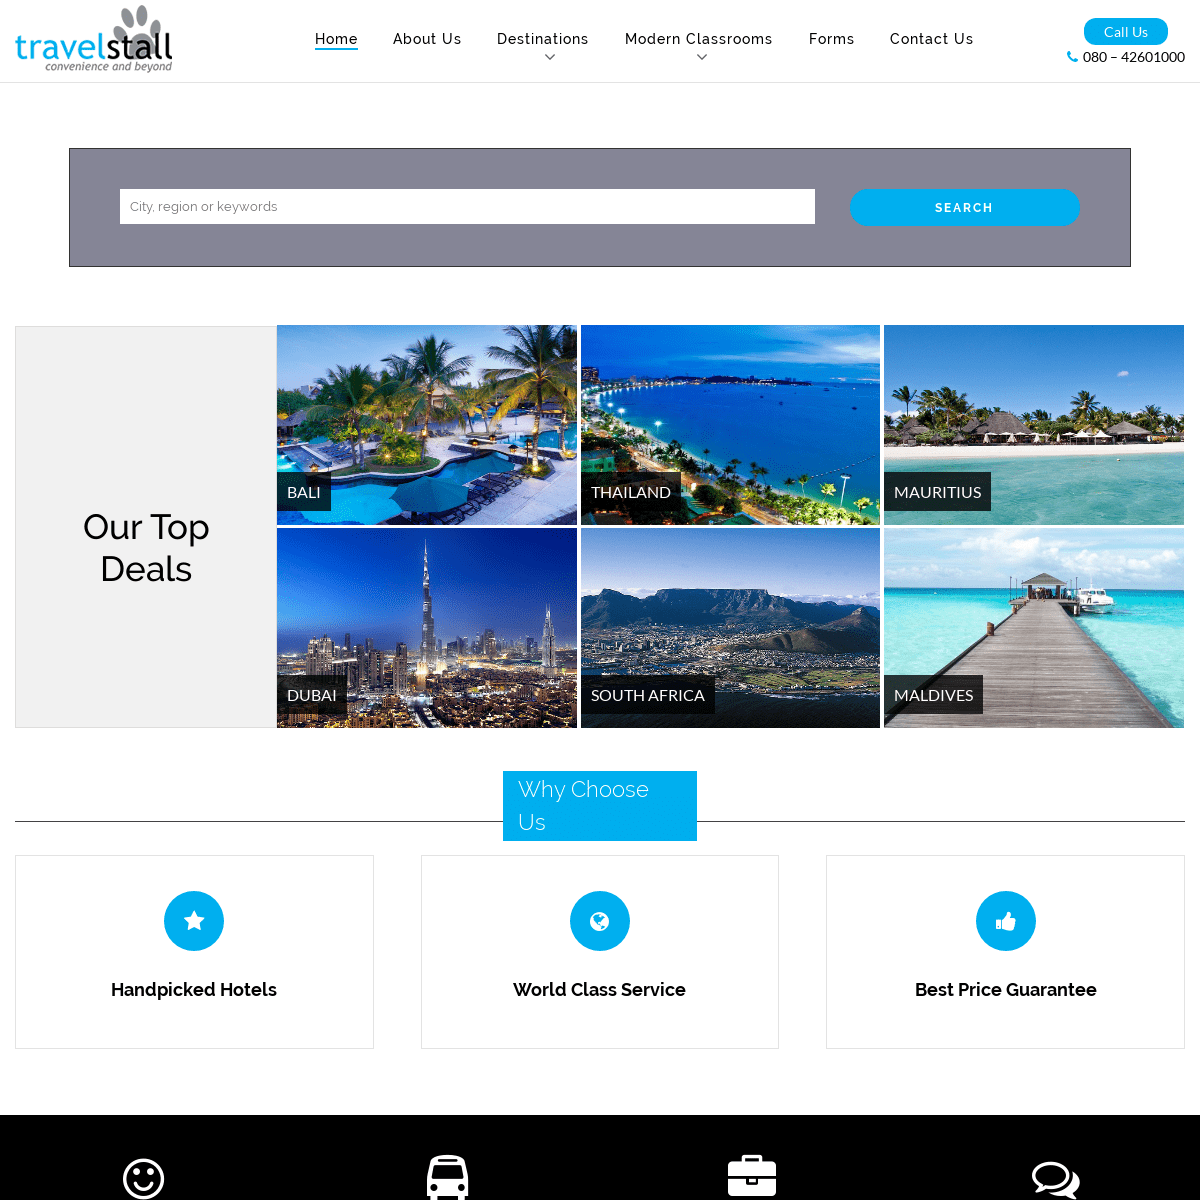 A complete backup of travelstall.com